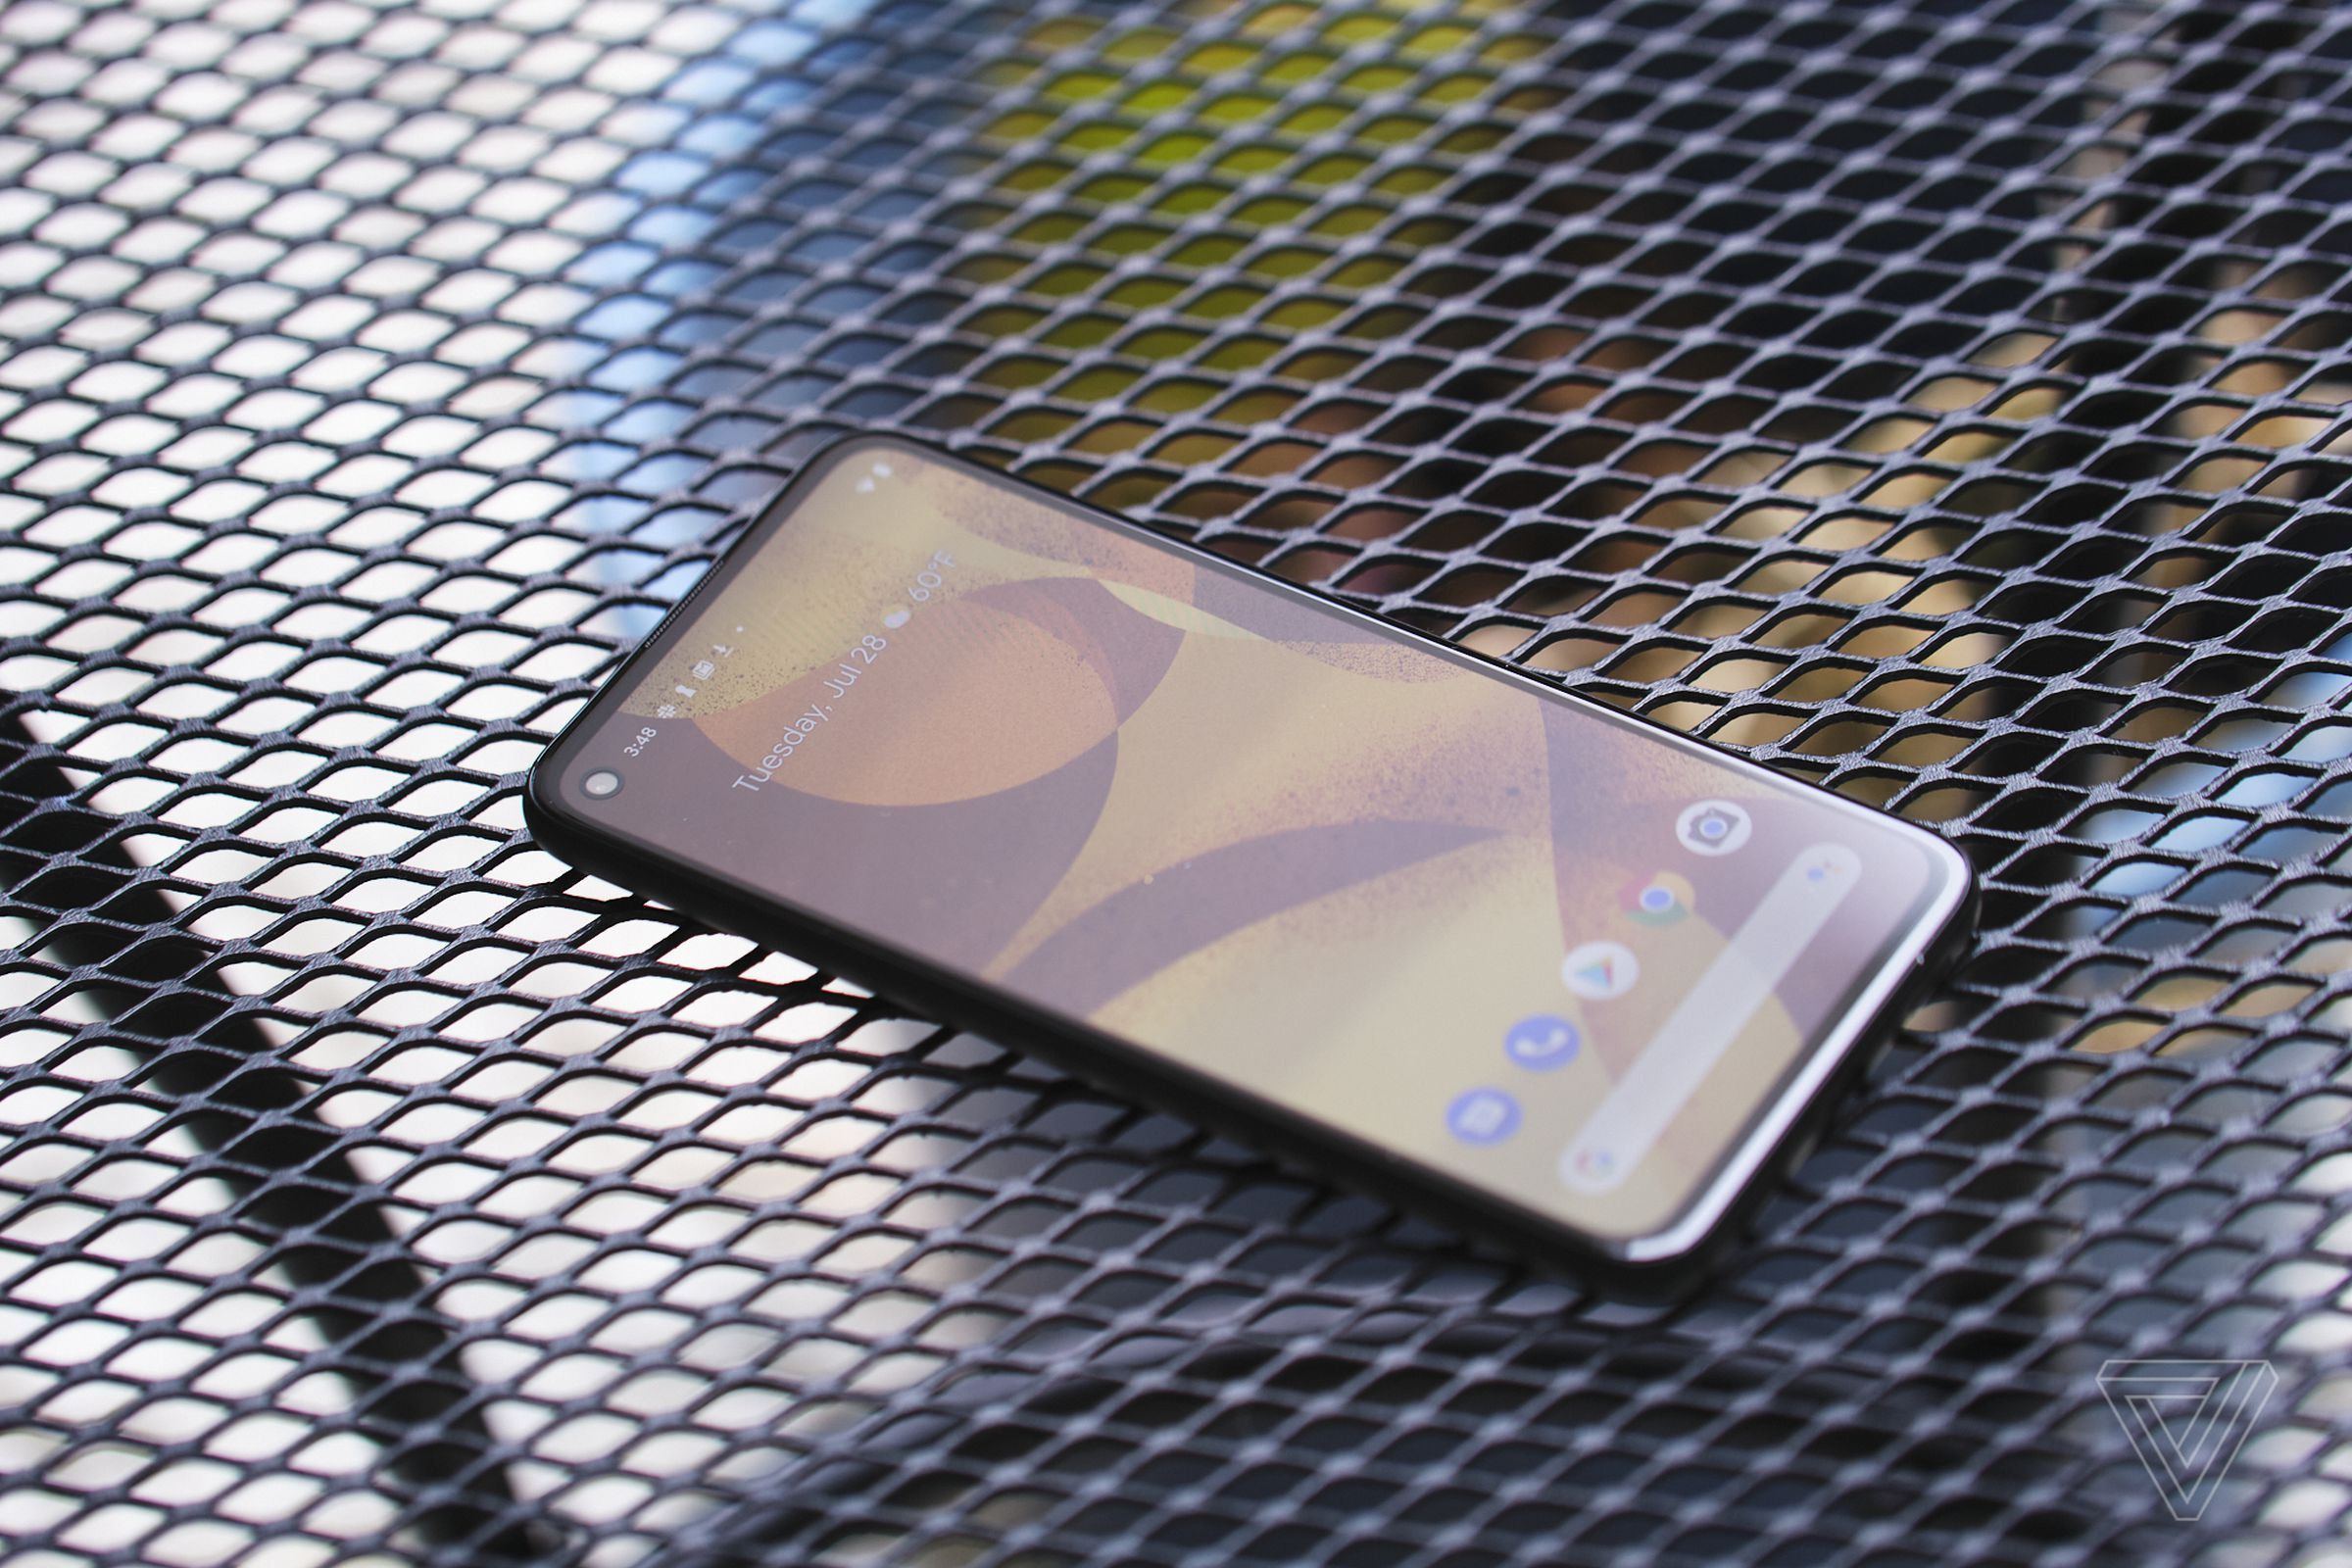 The Pixel 4A has Google’s first hole-punch display.